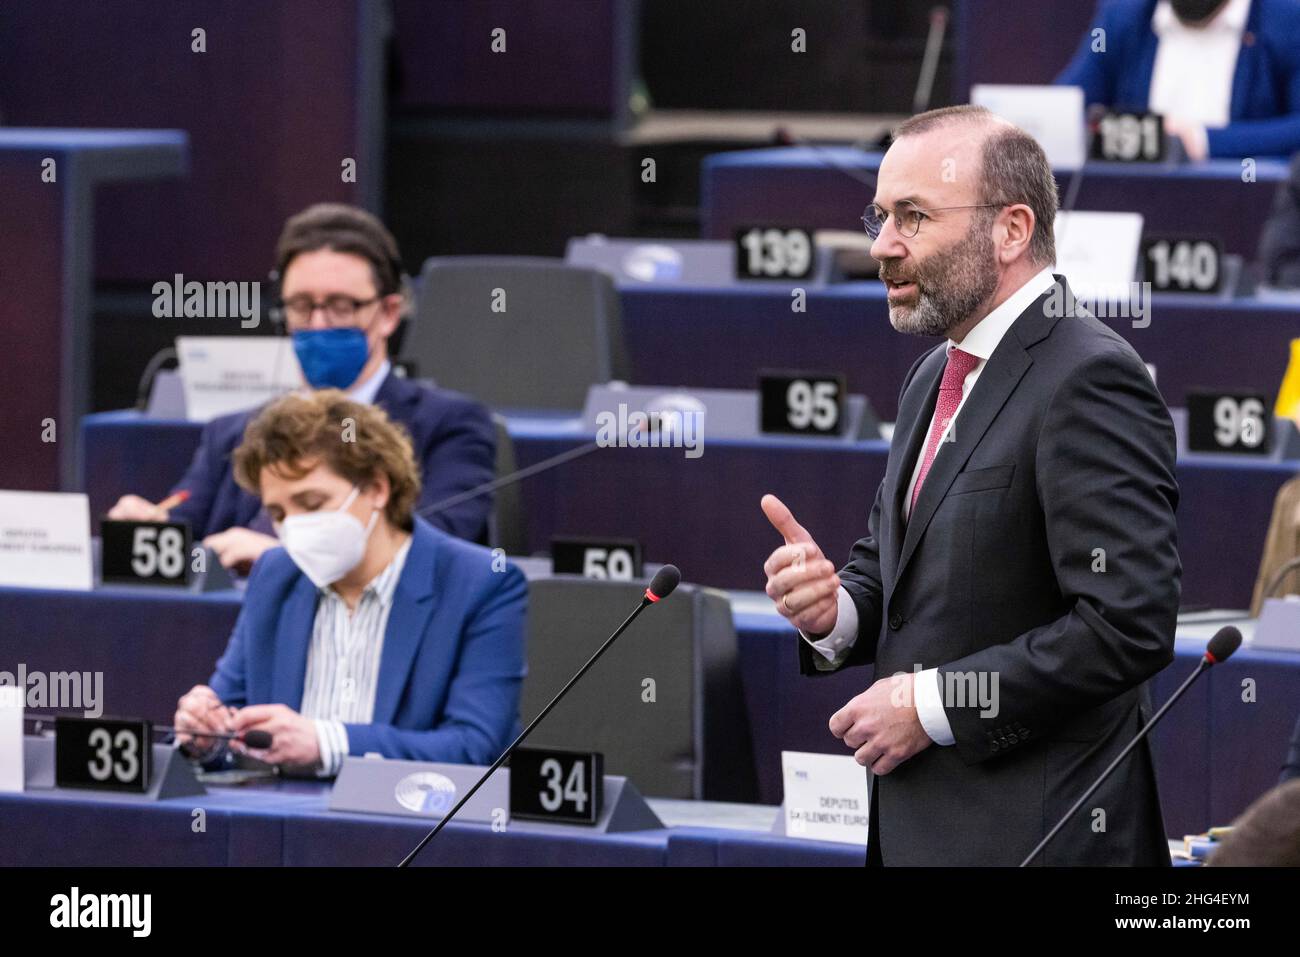 18 January 2022, France, Straßburg: Manfred Weber (CSU), EPP Group, stands in the European Parliament building and speaks after the election of R. Metsola (Partit Nazzjonalista, not in the picture), EPP Group, as President of the European Parliament. Metsola was considered the favorite for the post and was able to win in the first round of voting. Photo: Philipp von Ditfurth/dpa Stock Photo